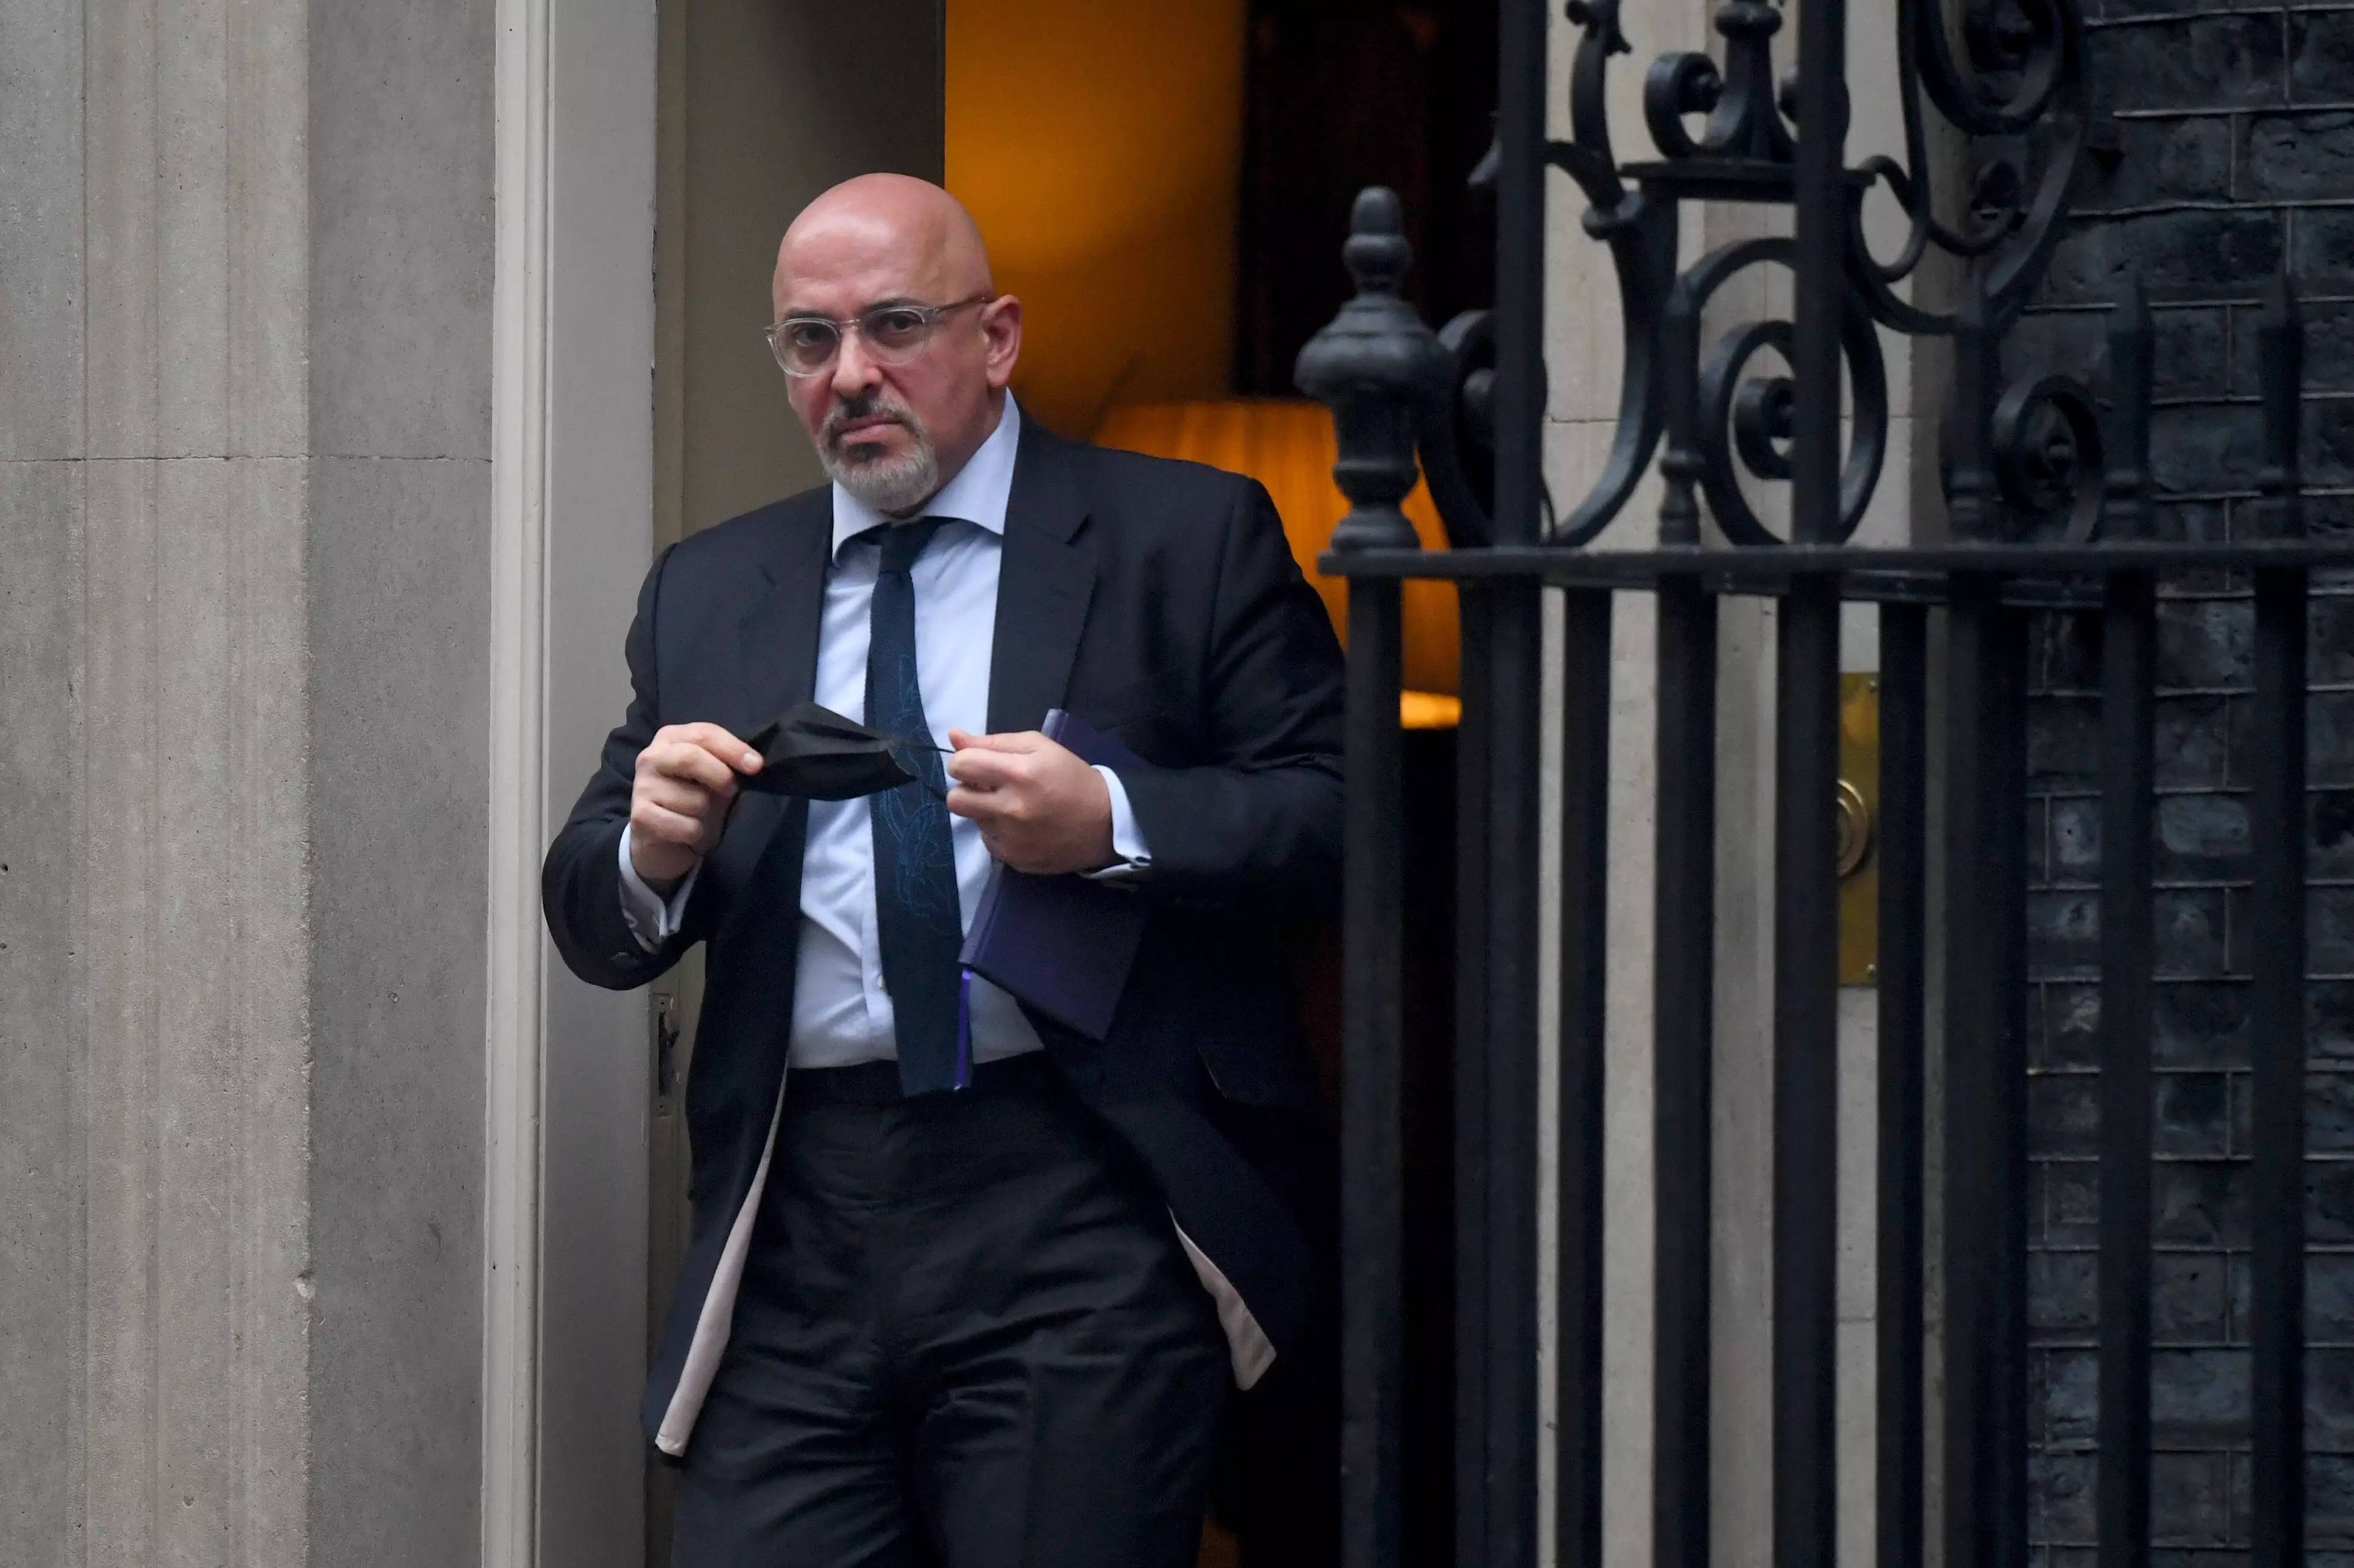 Vaccine deployment minister Nadhim Zahawi has also ruled out vaccine passports.